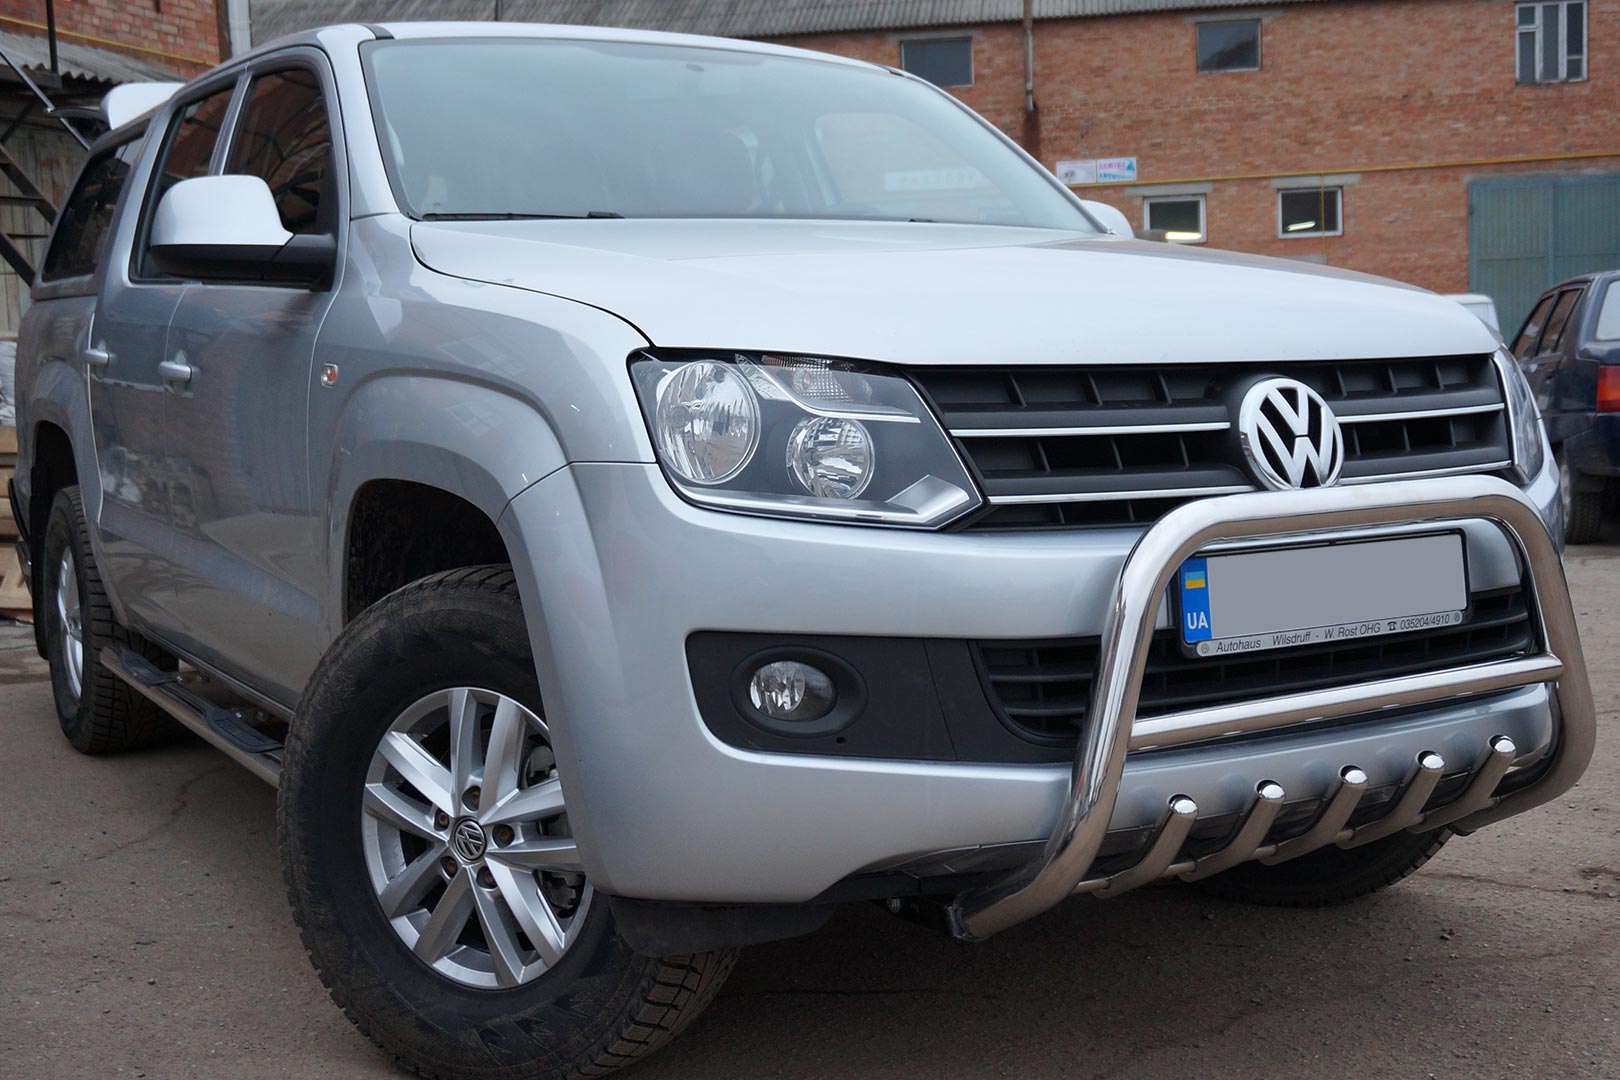 Tuning VW Amarok - installation of thresholds, bumper protection and hardtop